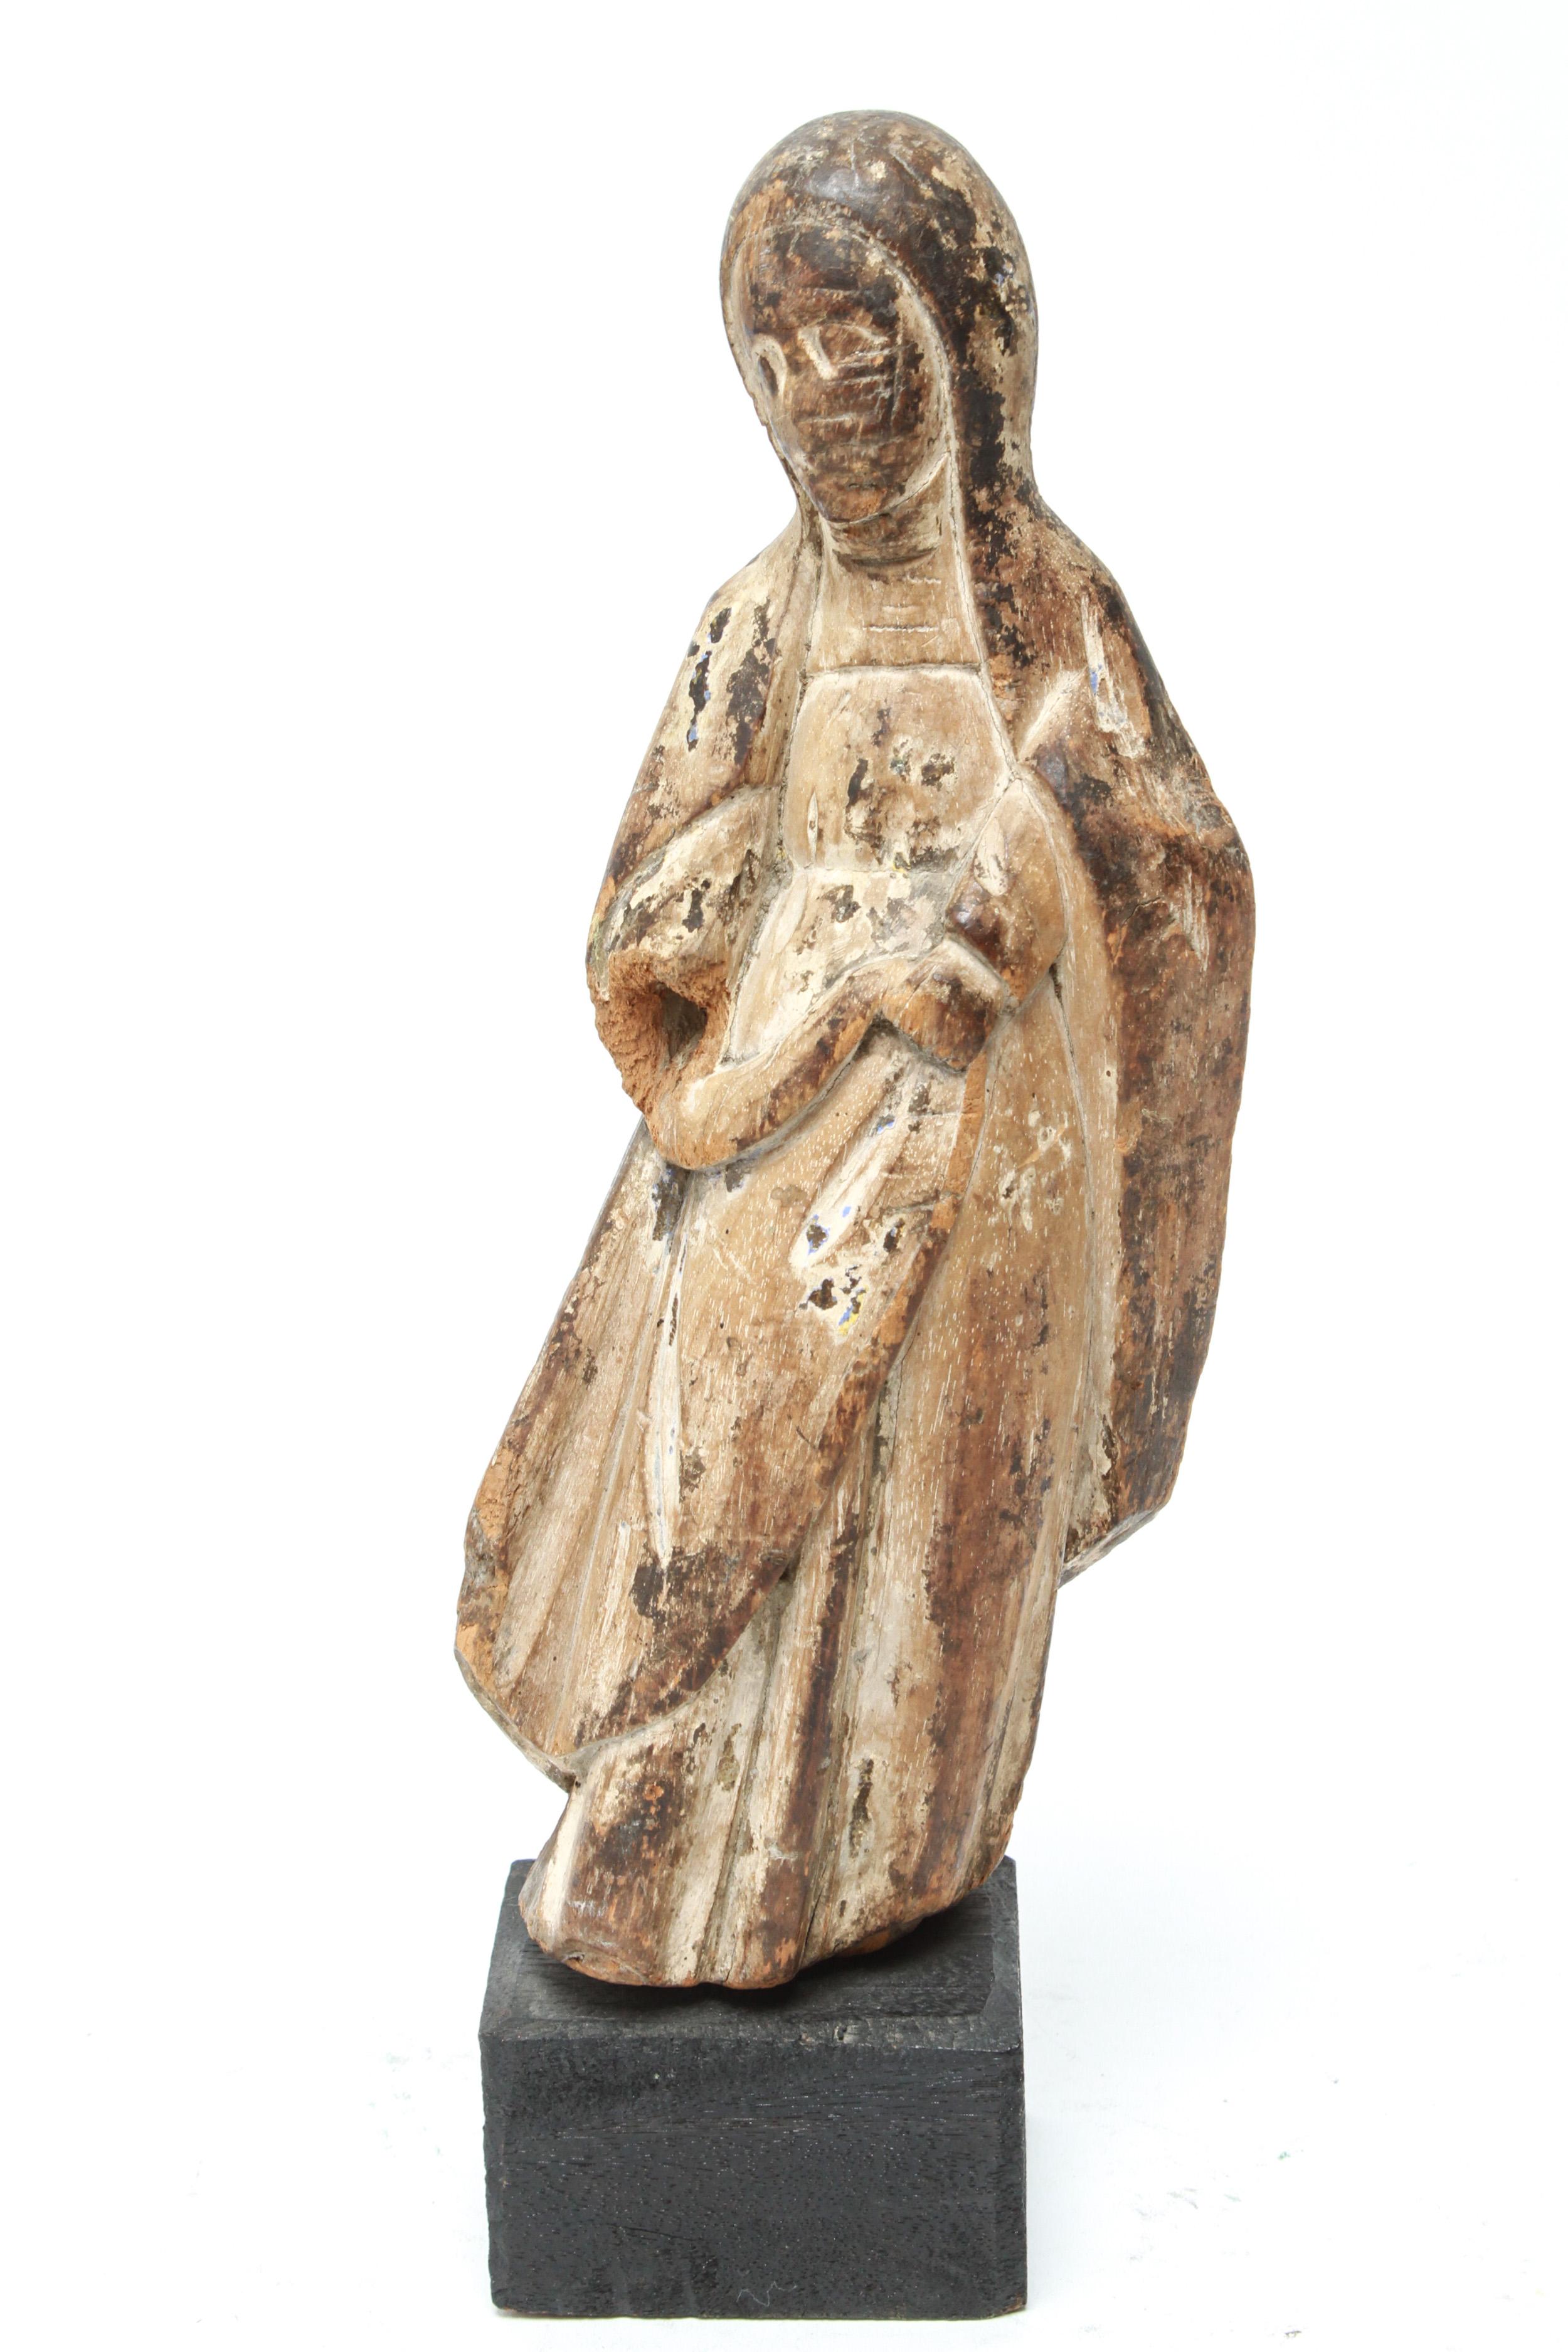 Santos Santa Maria carved wood sculpture with traces of paint, label on reverse: 